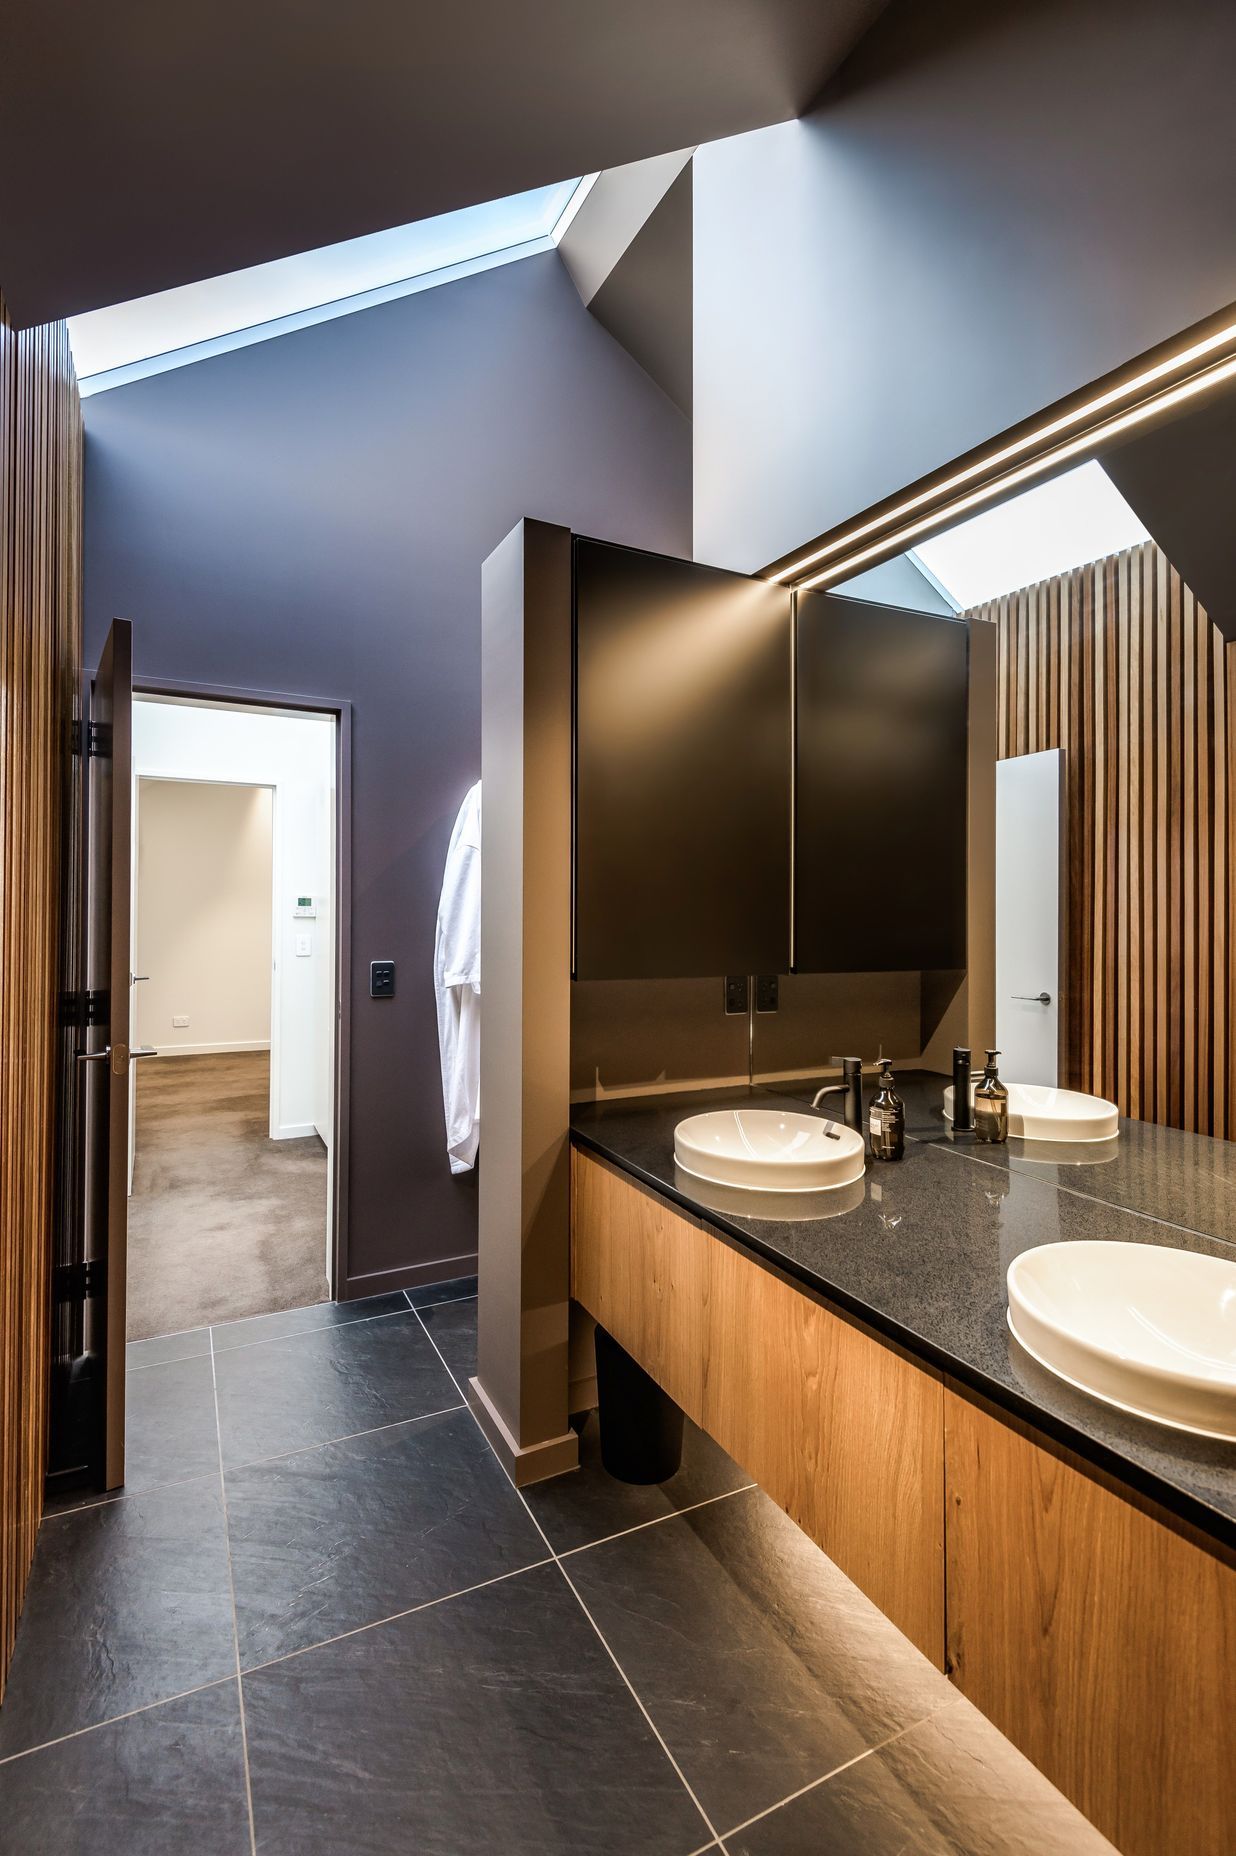 The bathroom uses large-format concrete-look tiles and timber cabinetry and panelling